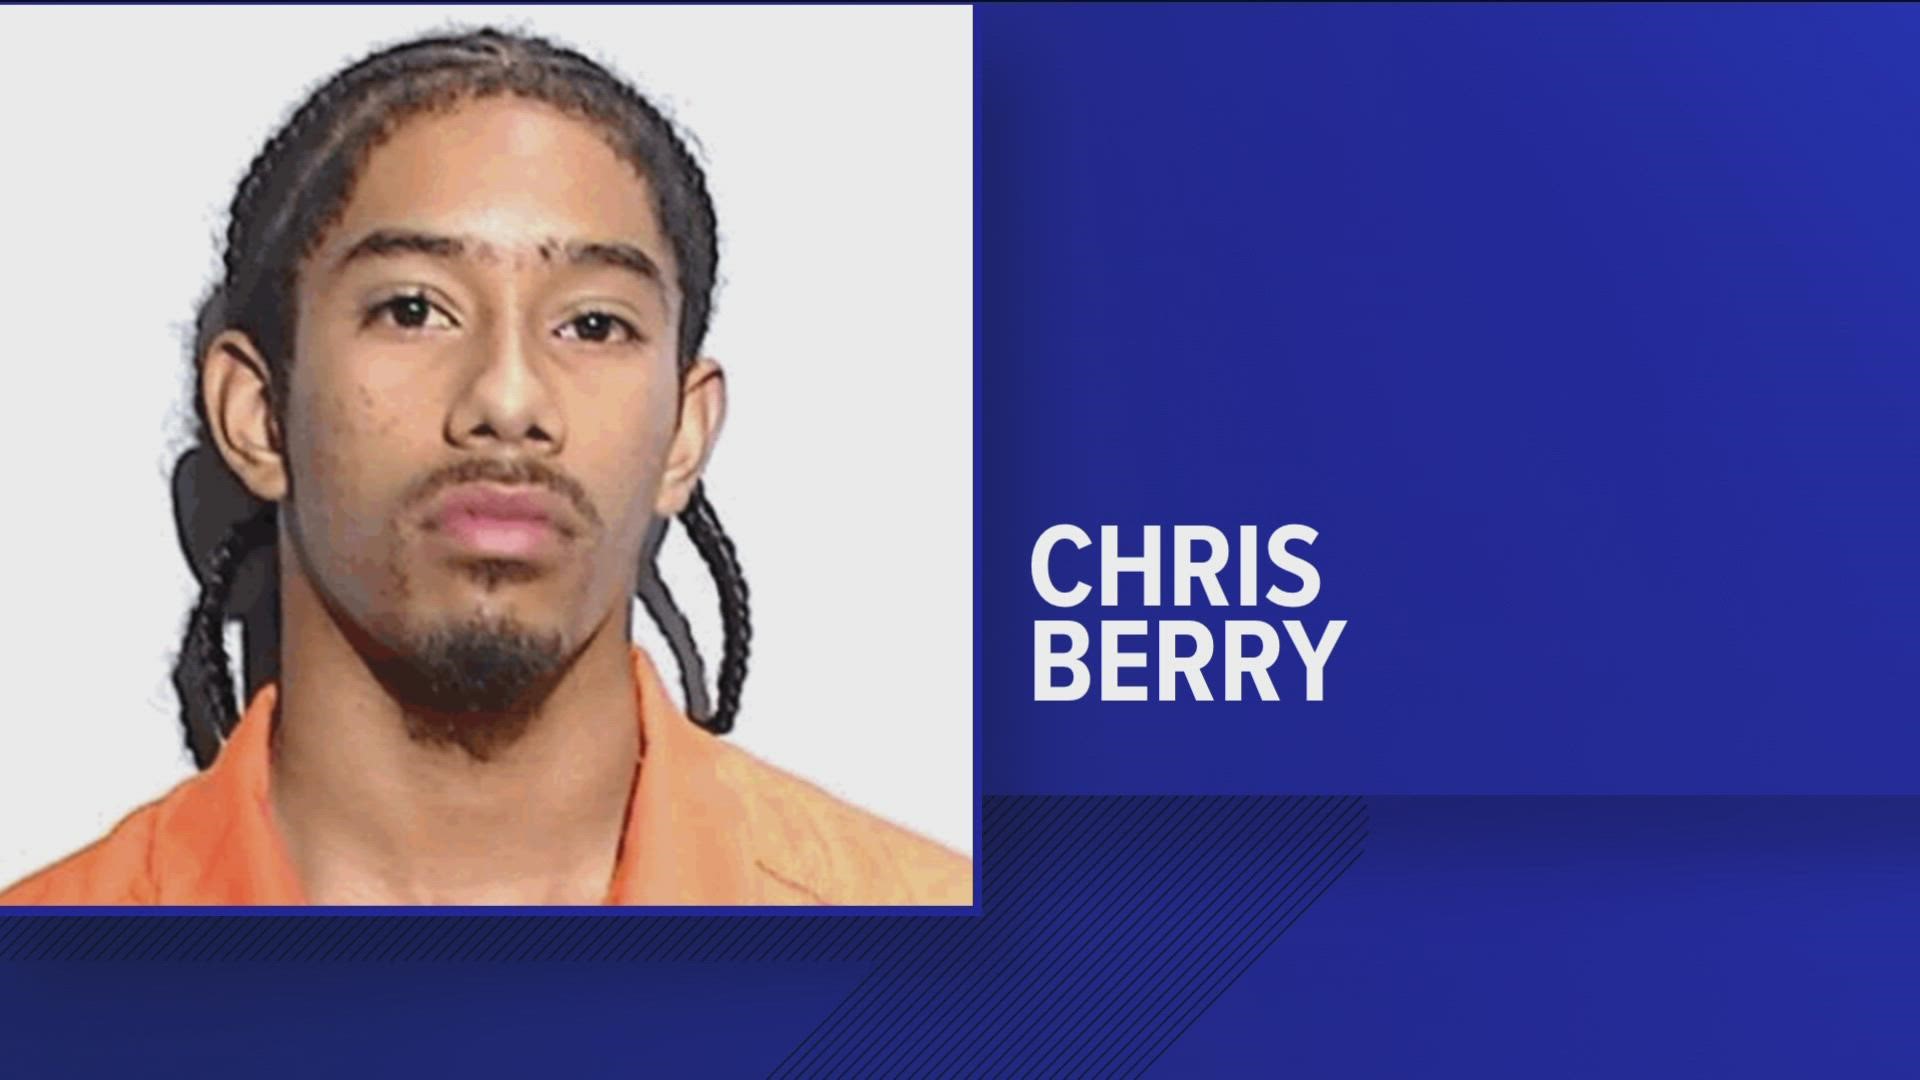 19-year-old Chris Berry was arrested and charged with murder Wednesday in the shooting death of Corey Coley on Aug. 26.